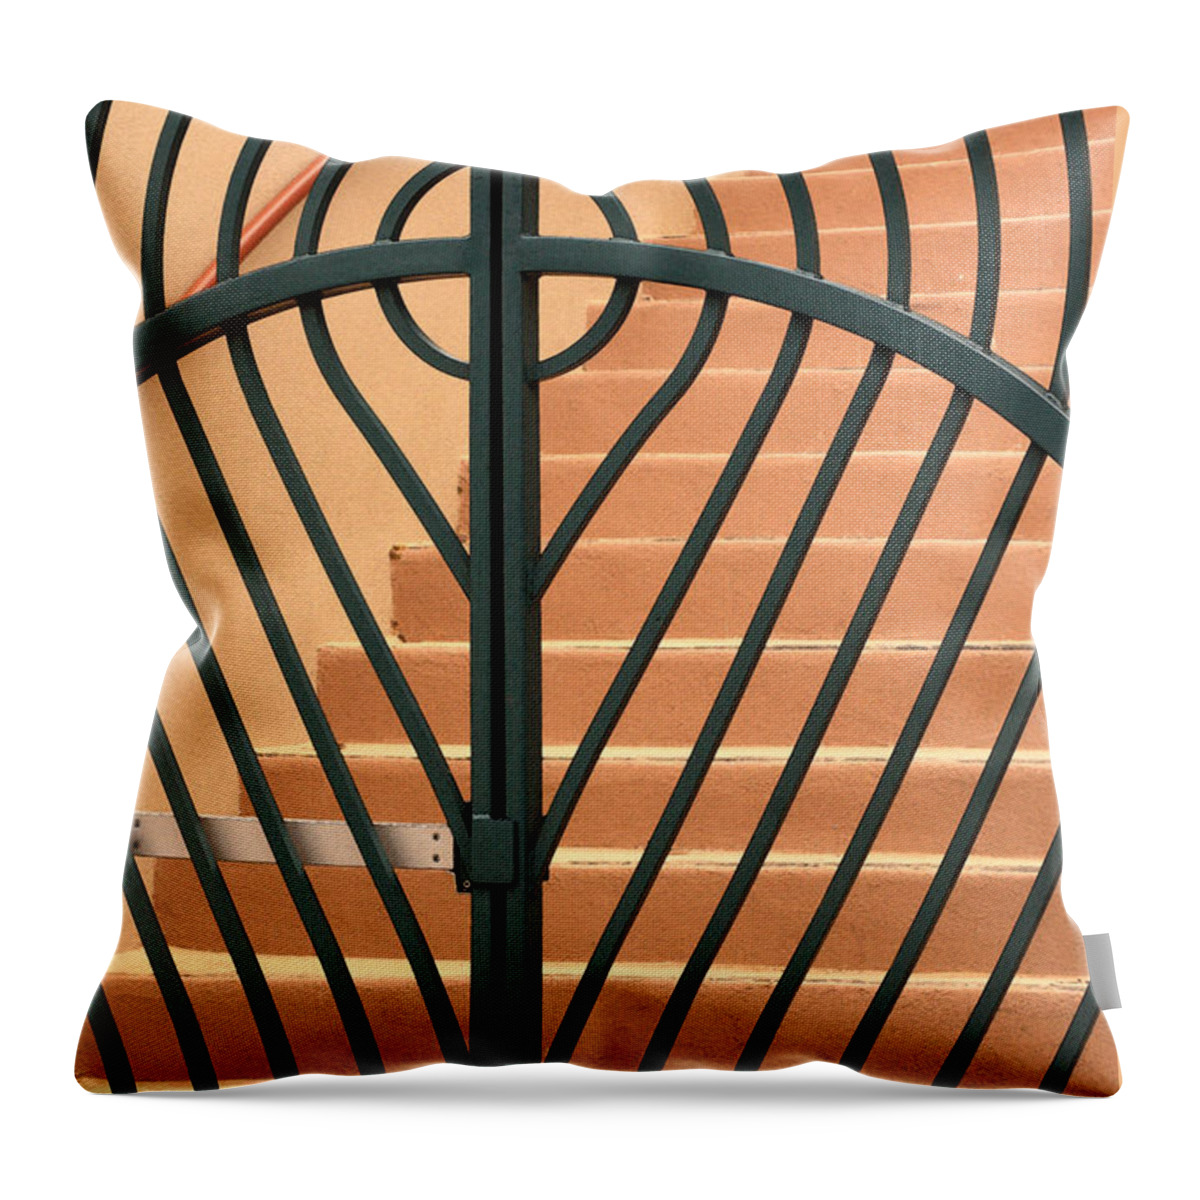 Gates Throw Pillow featuring the photograph Gated by Art Block Collections